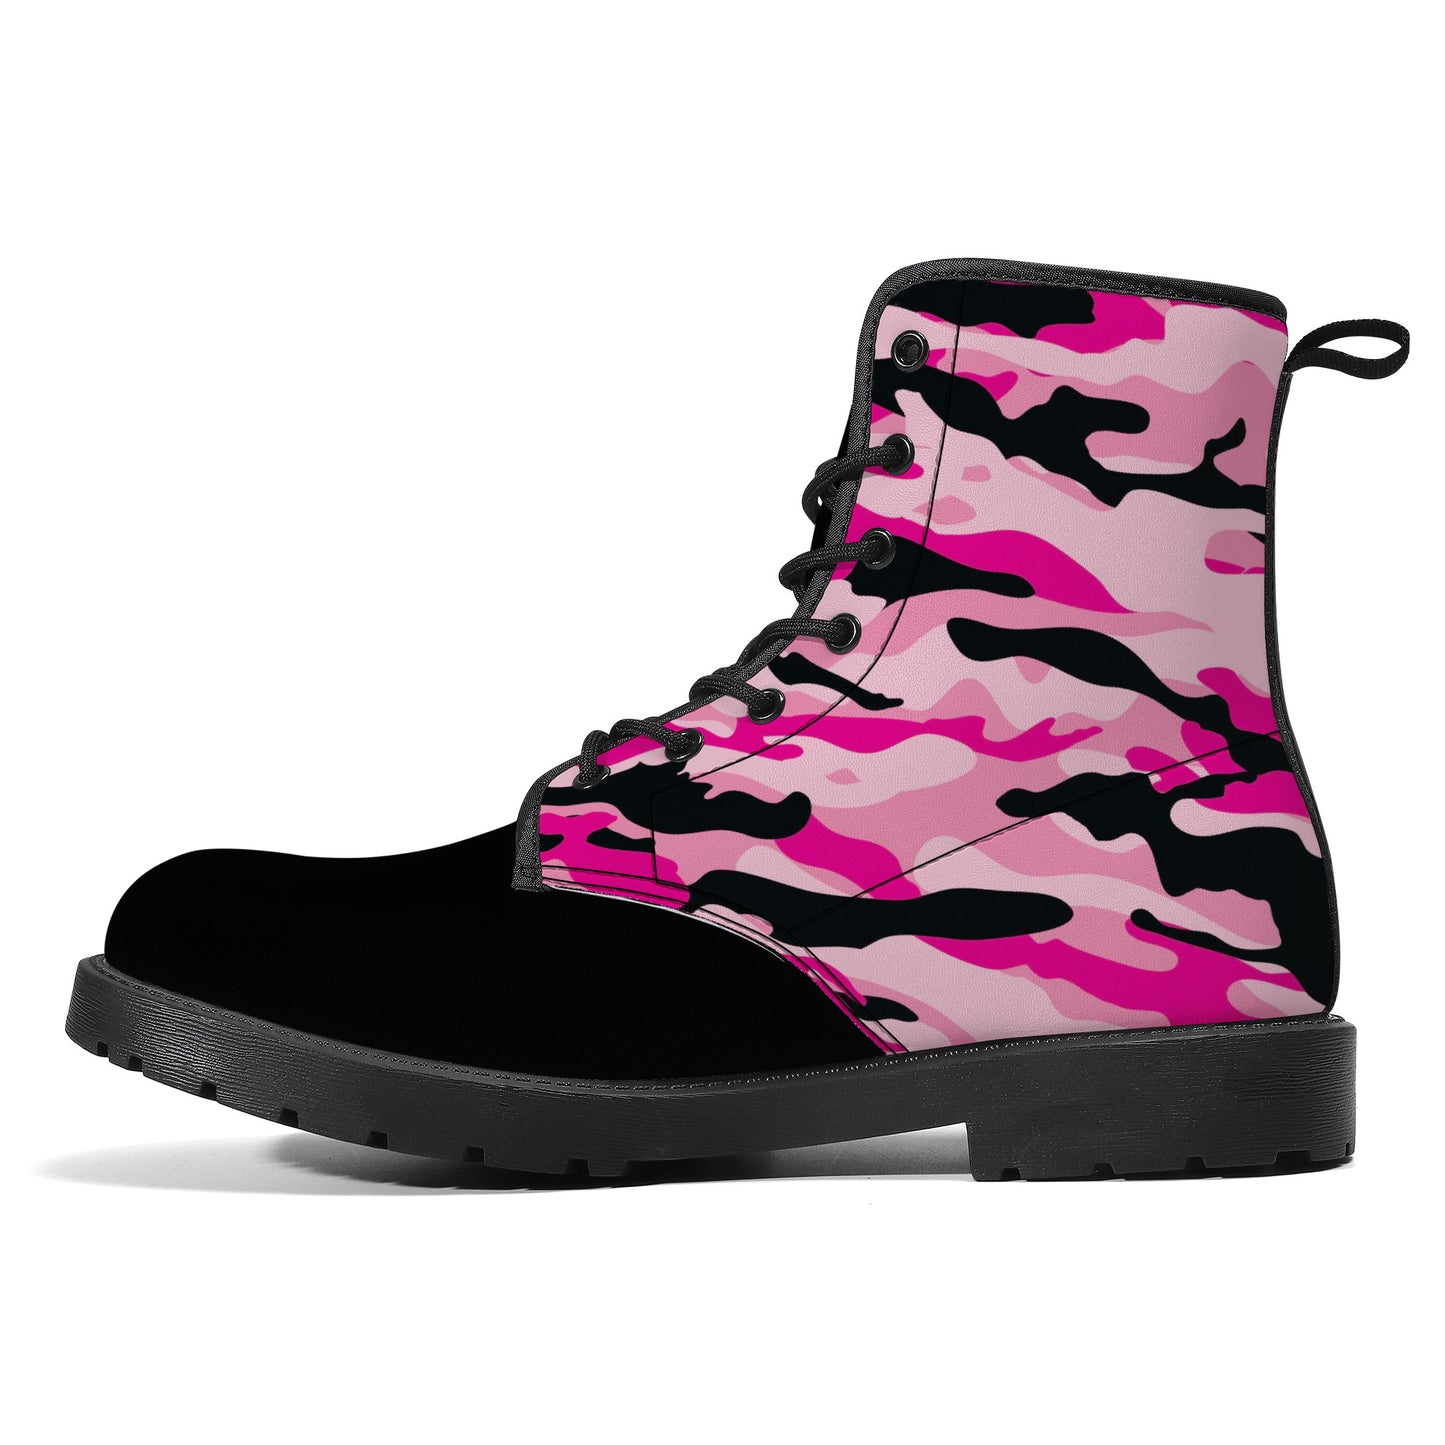 Unisex - Synthetic Leather Boots - Pink Camoflauge